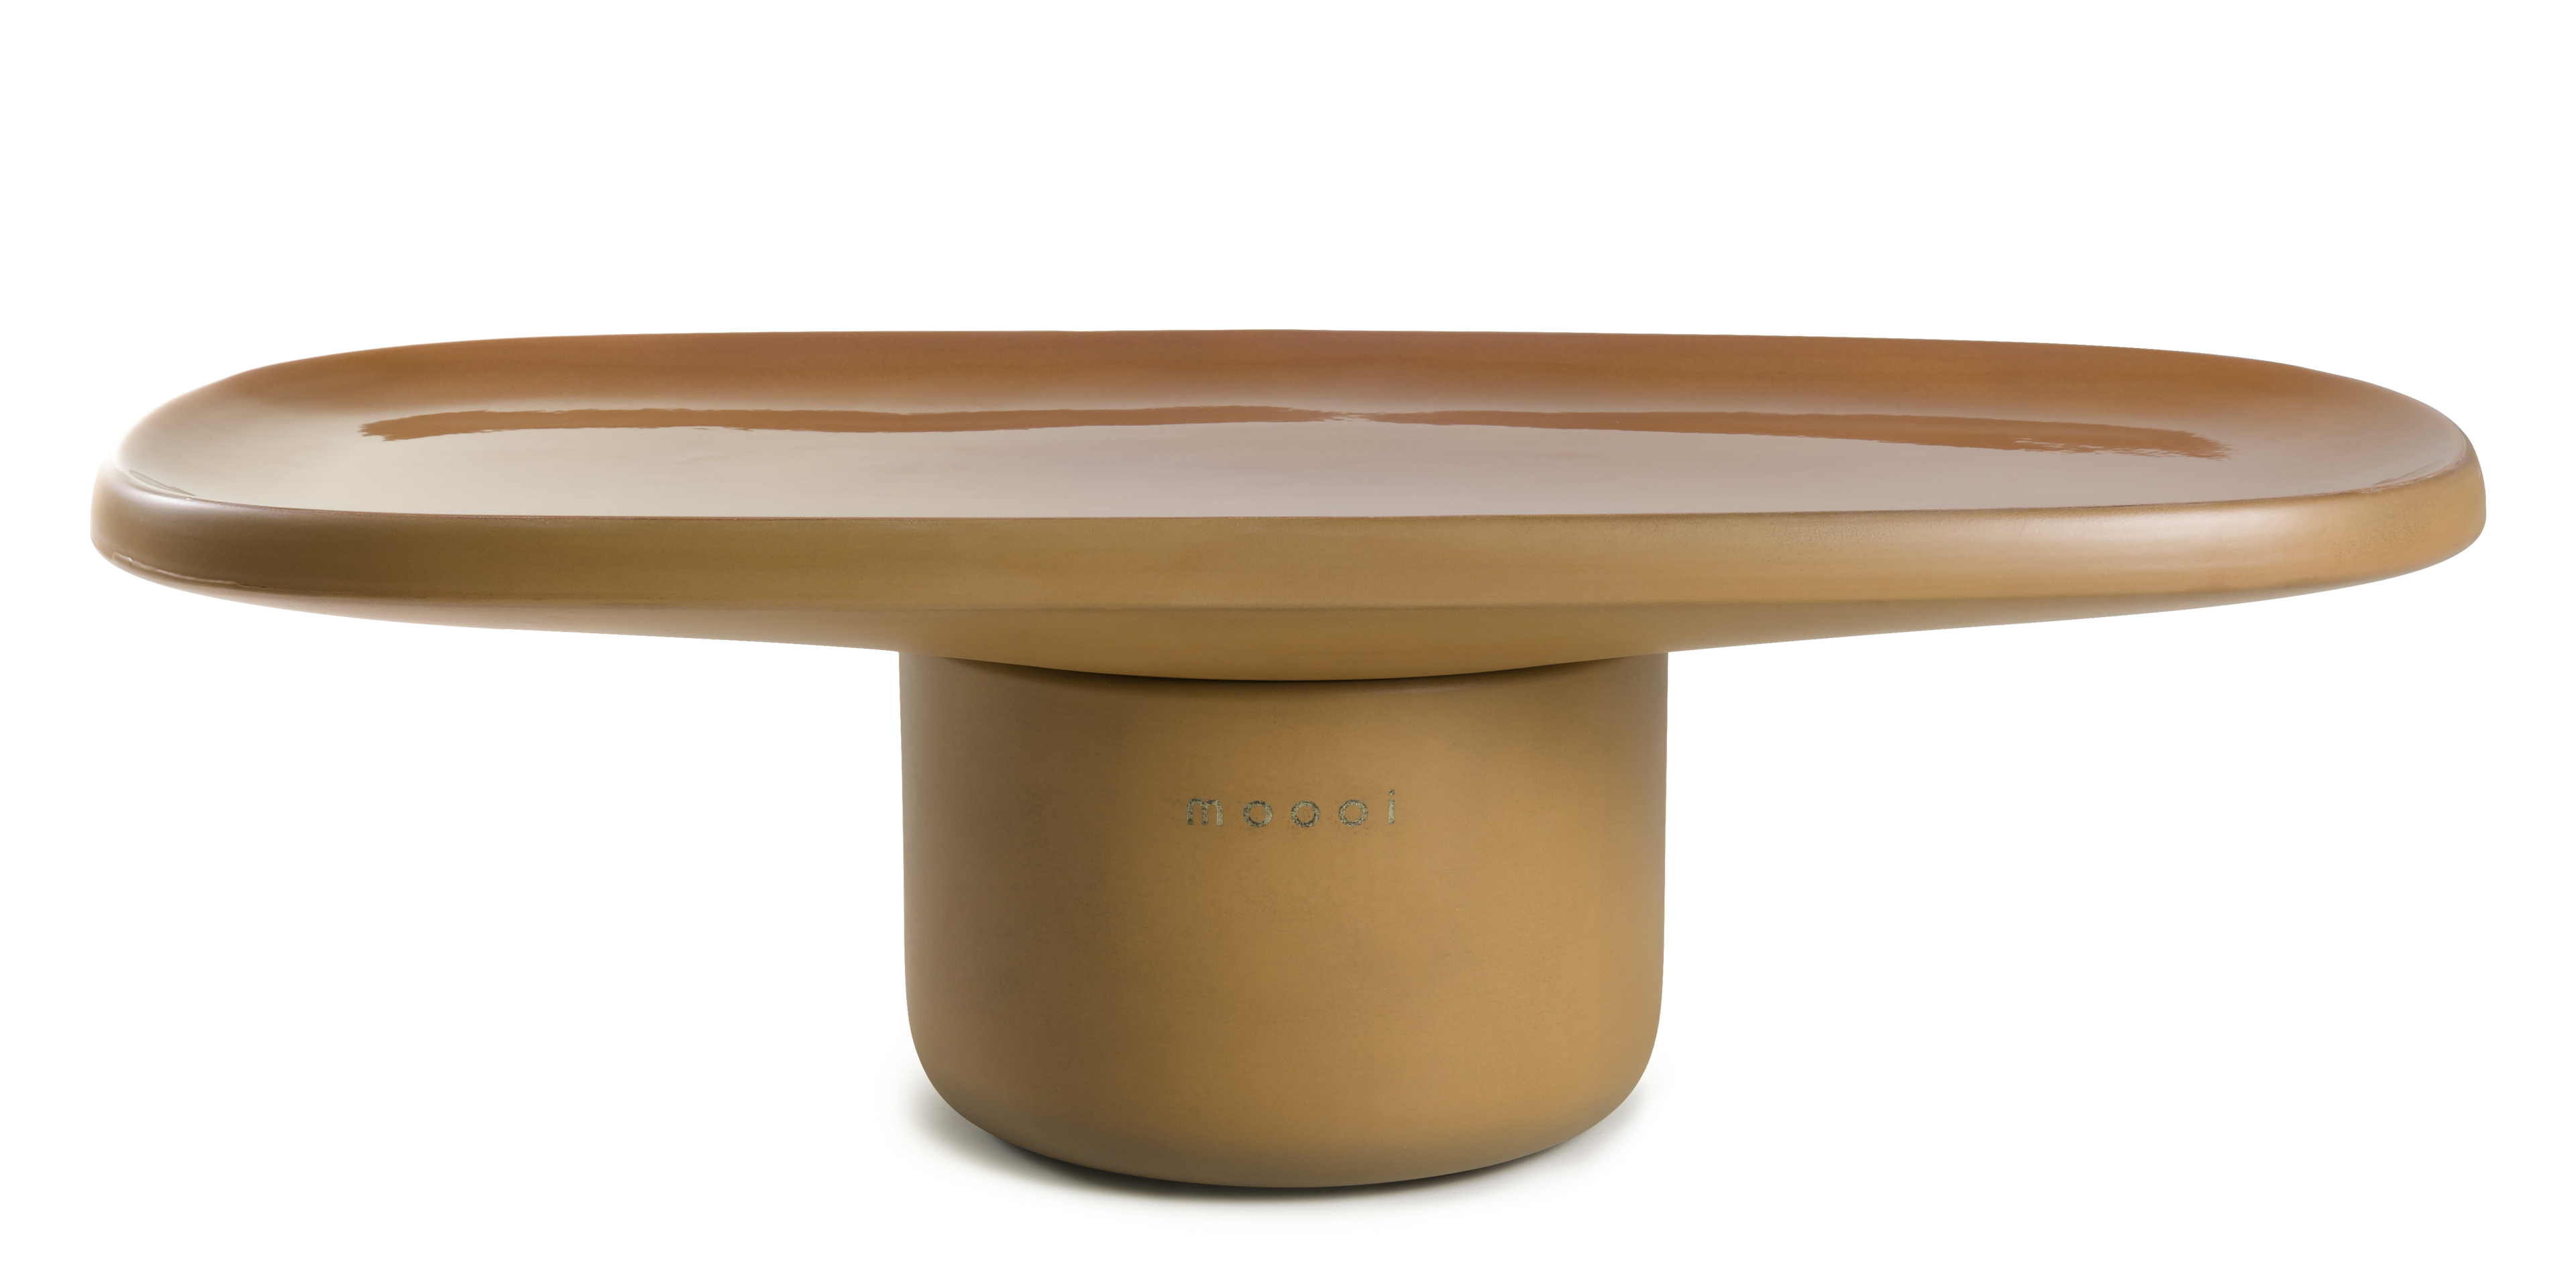 Obon table rectangle low terracotta 